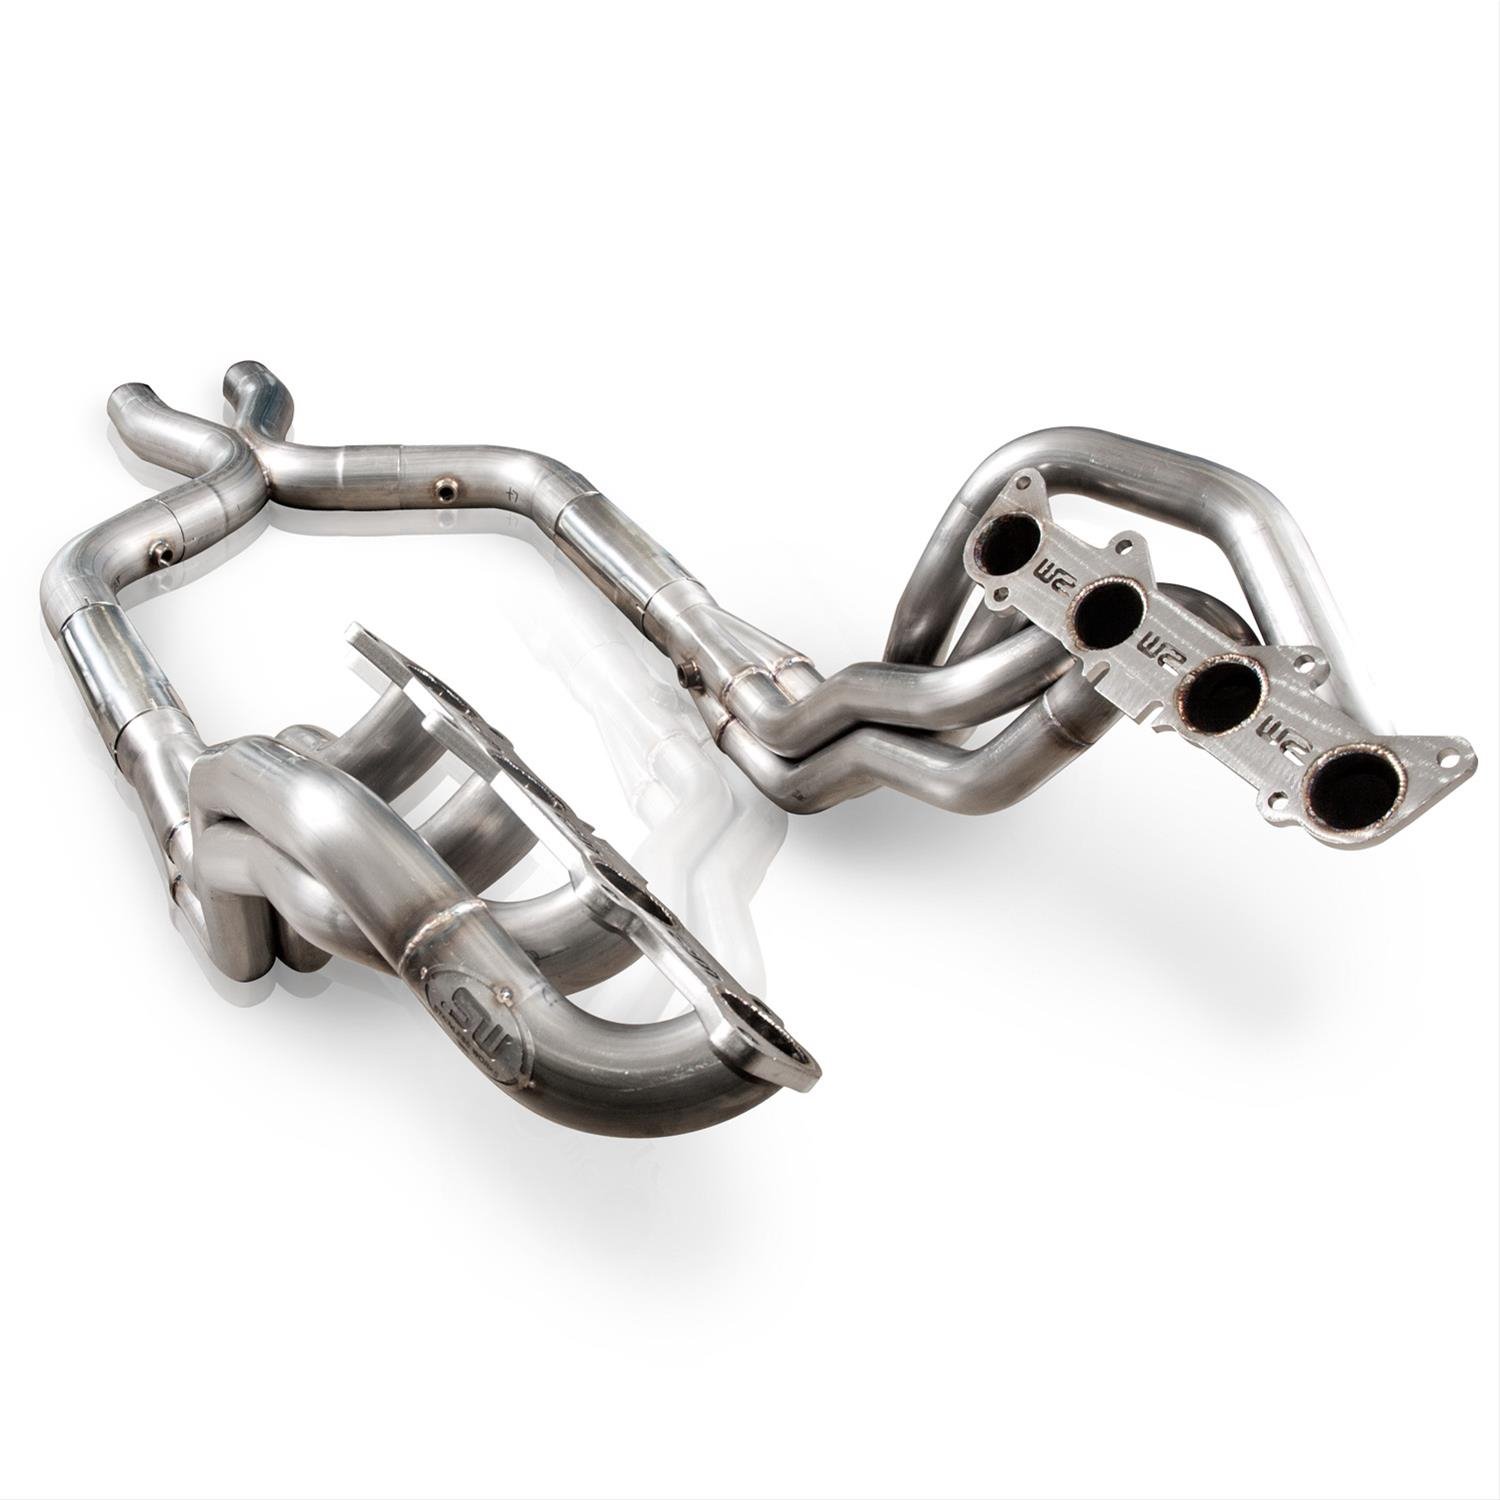 Mustang GT headers with 1-7/8 primary tubes 3 X-Pipe and 3 dia offroad lead pipes that mate to the f